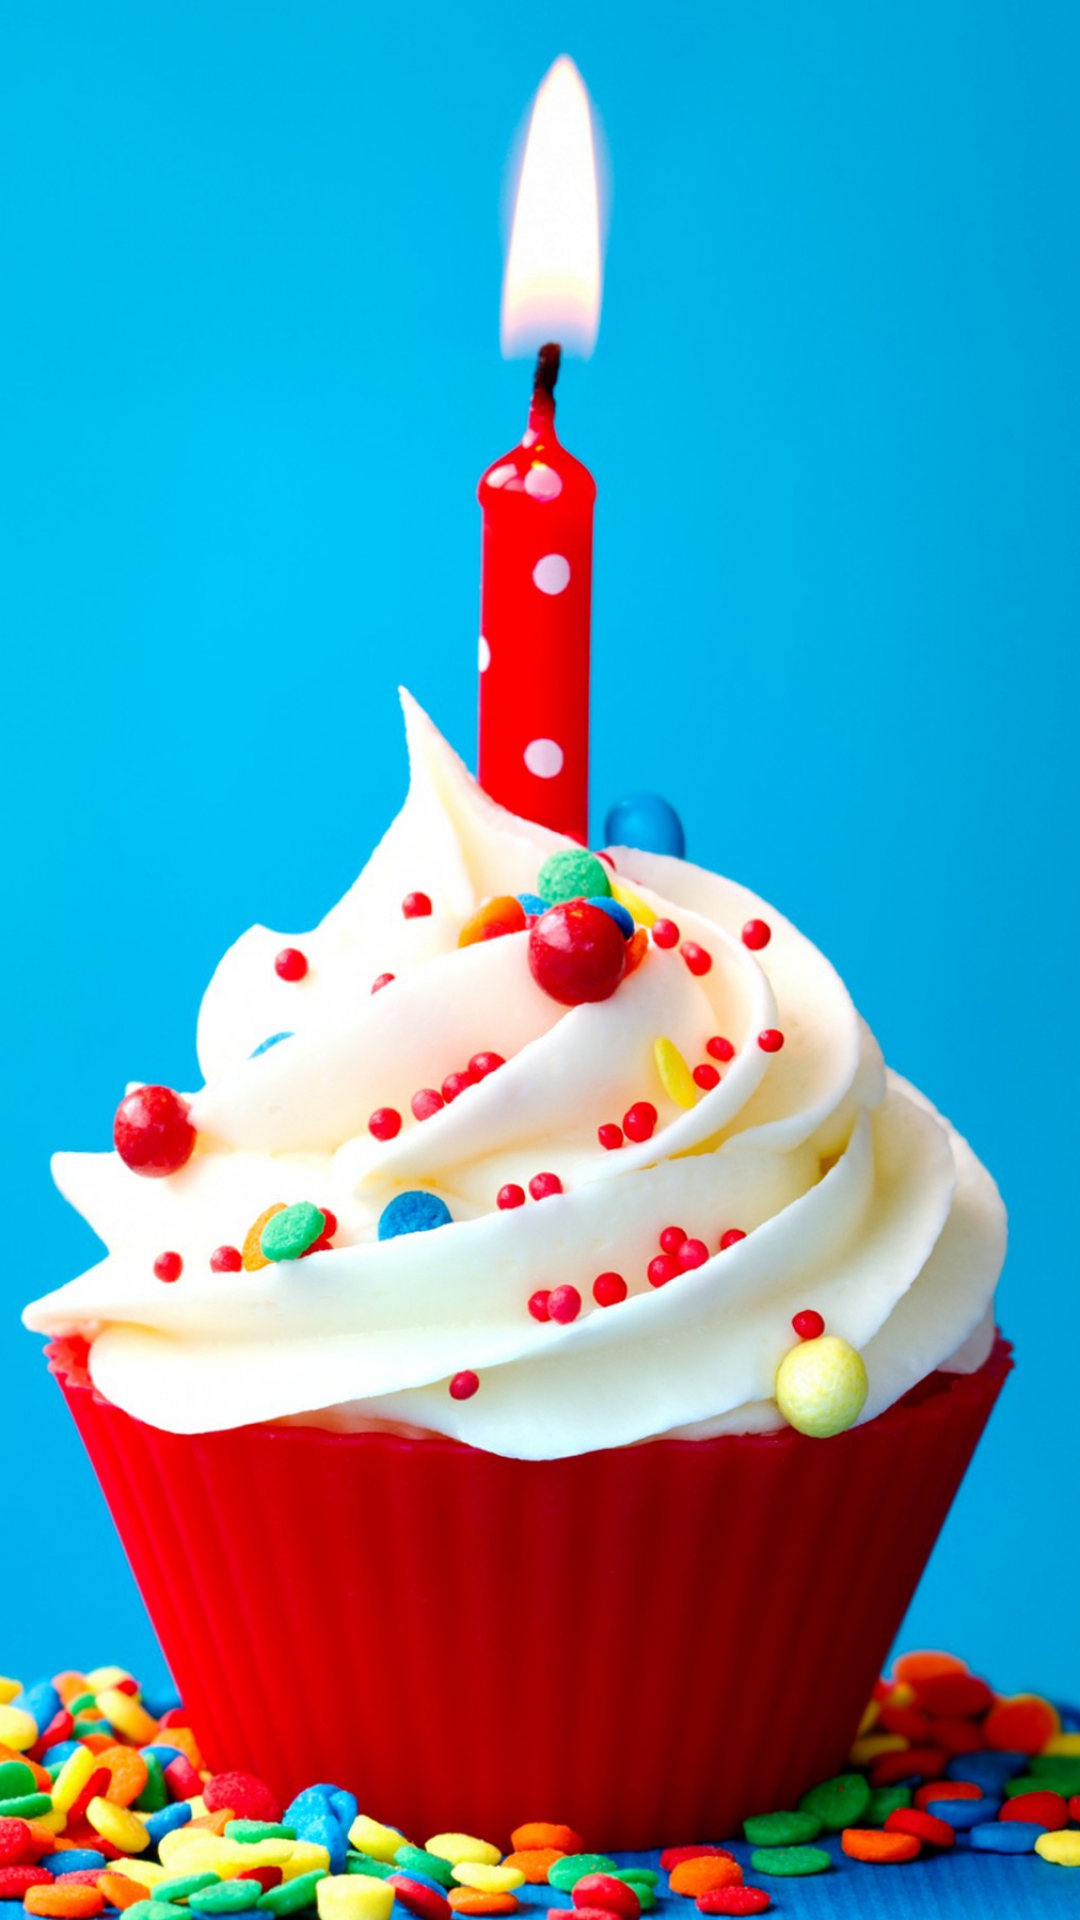 Birthday Cake - Birthday Cake One Candle , HD Wallpaper & Backgrounds